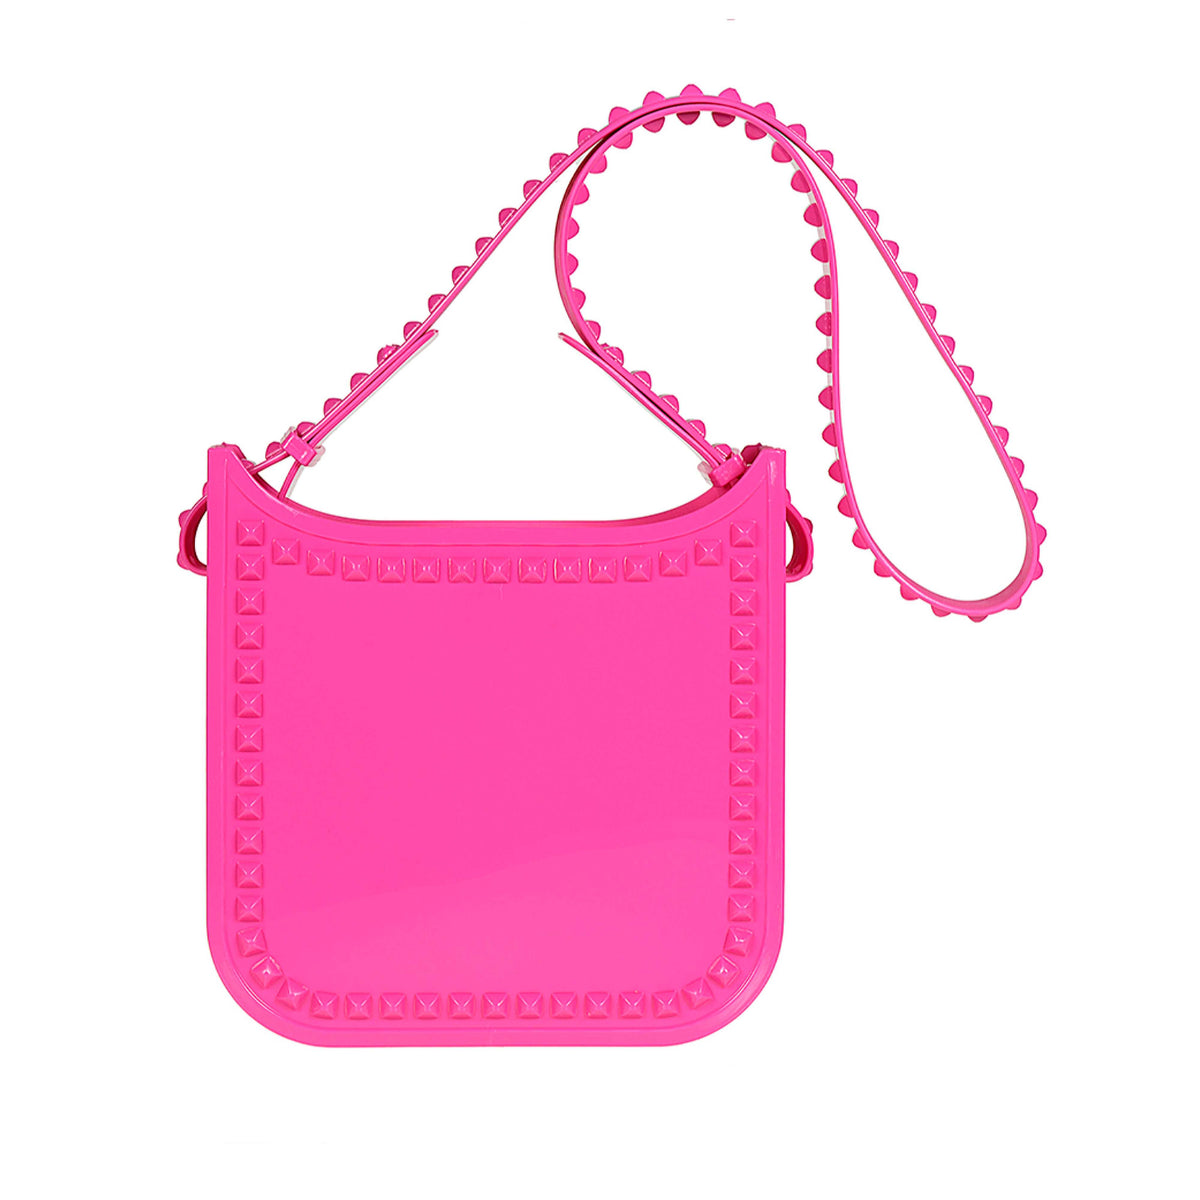 Sustainable Carmen Sol studded jelly bags in color fuchsia